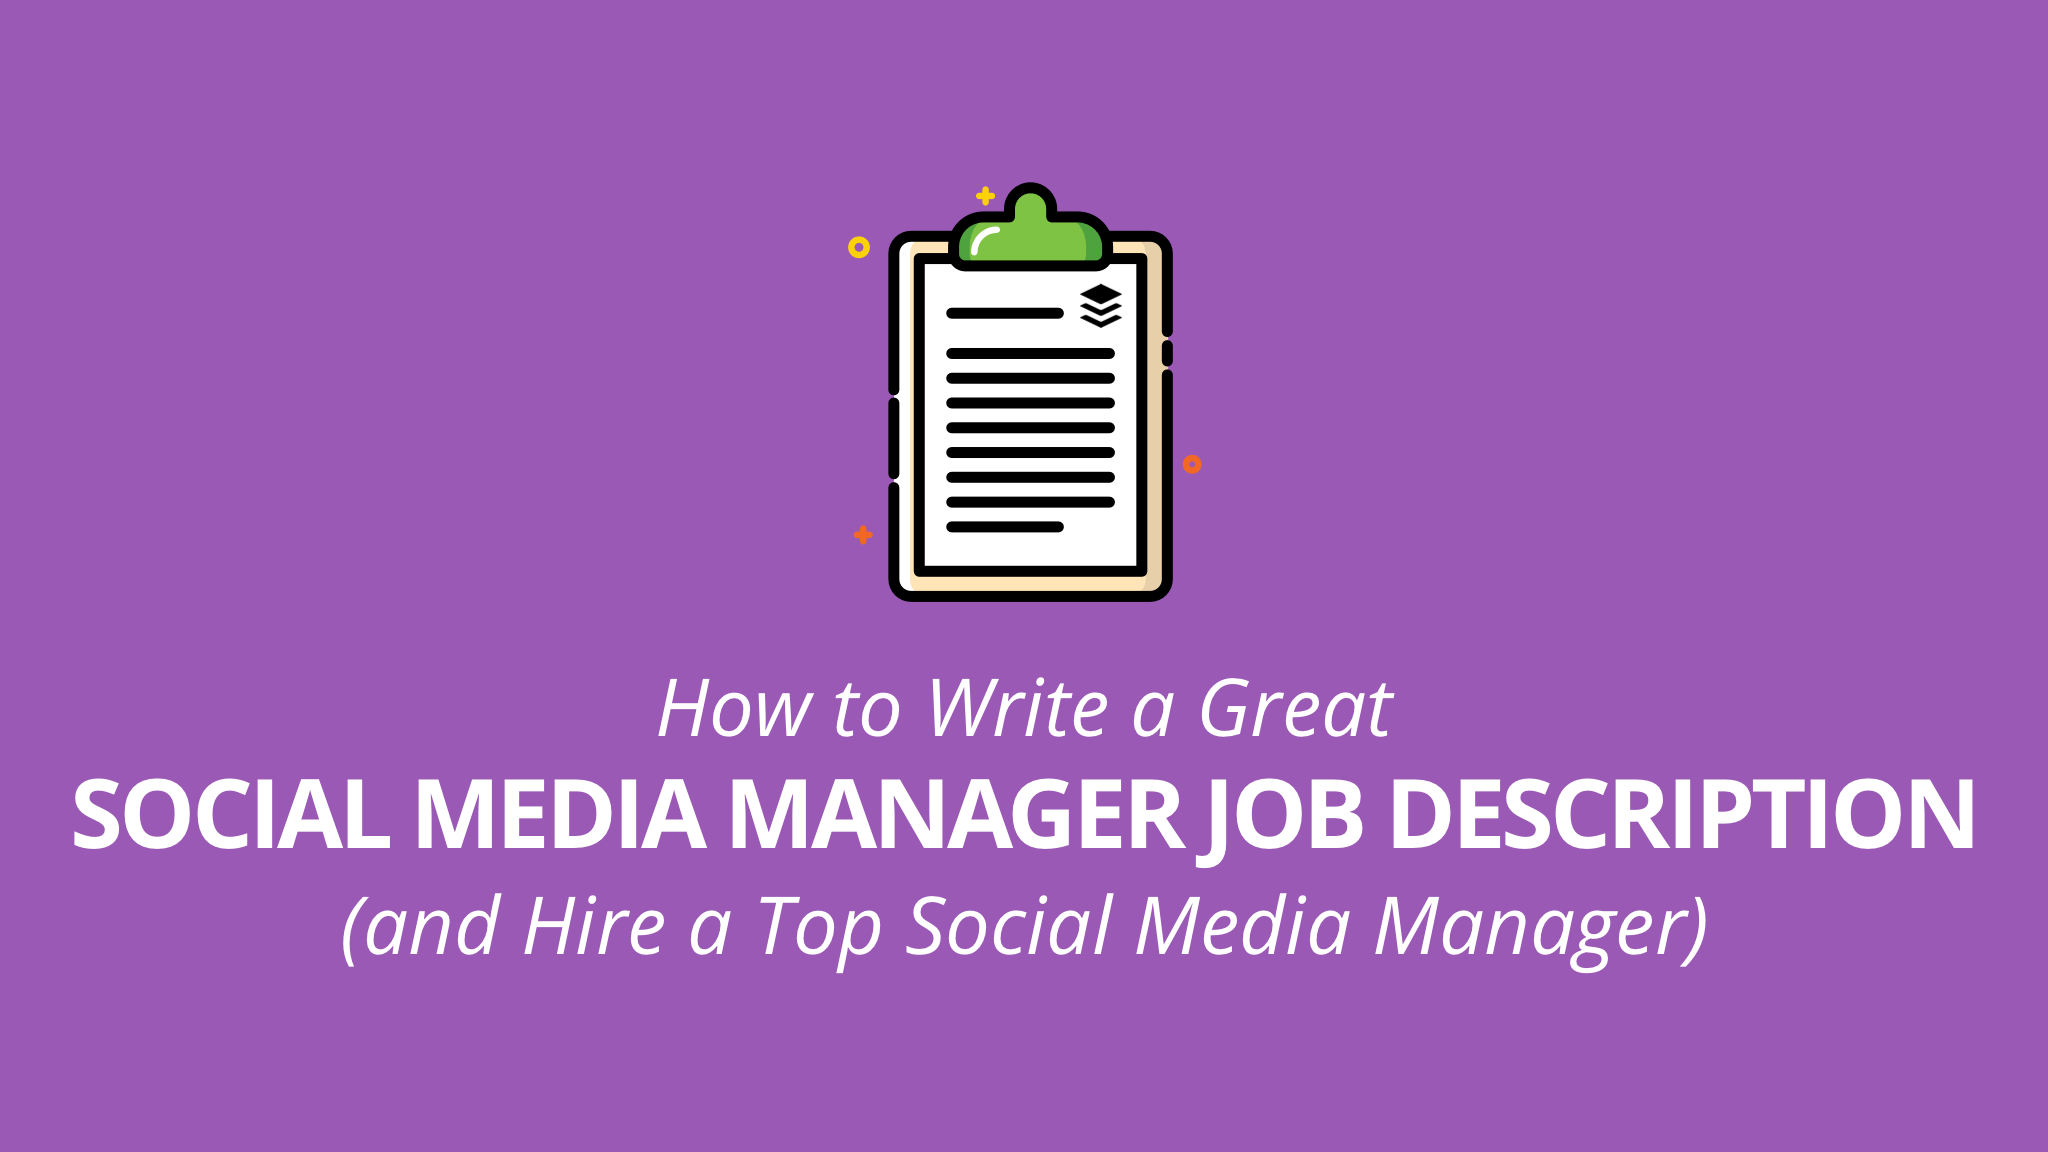 How to Write a Great Social Media Manager Job Description (and Hire a Top Social Media Manager)